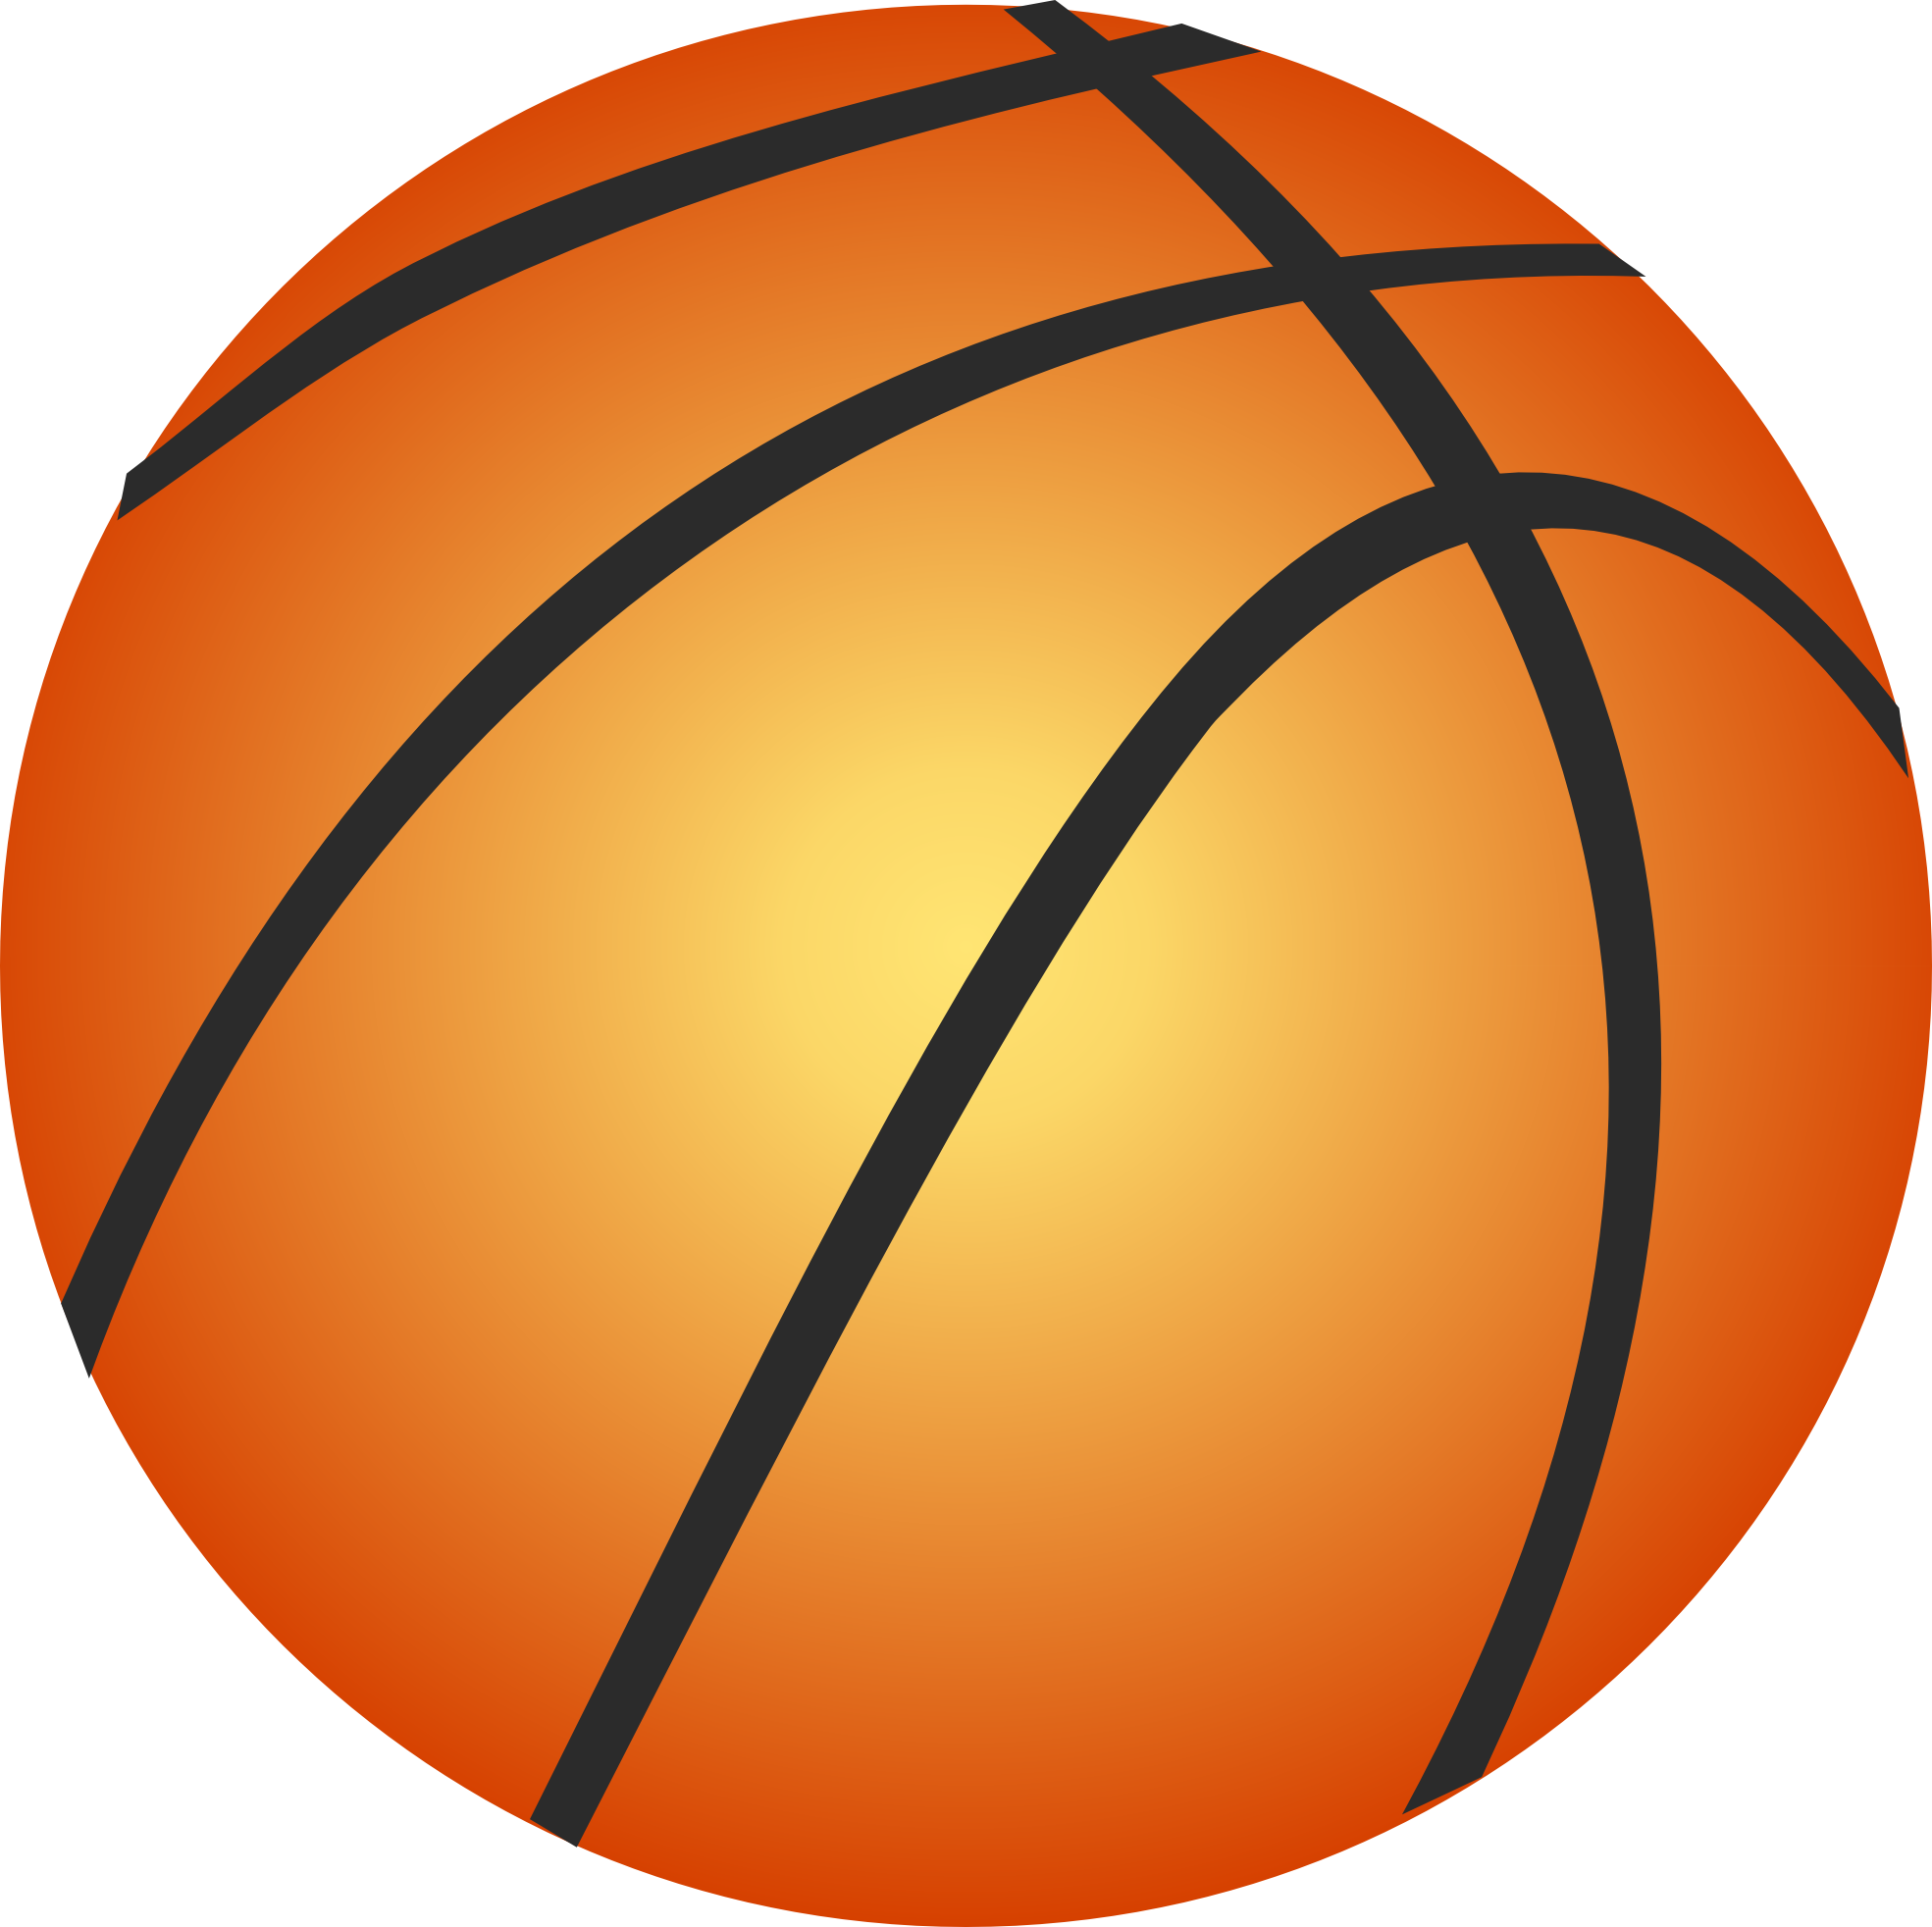 Free basketball images clip art